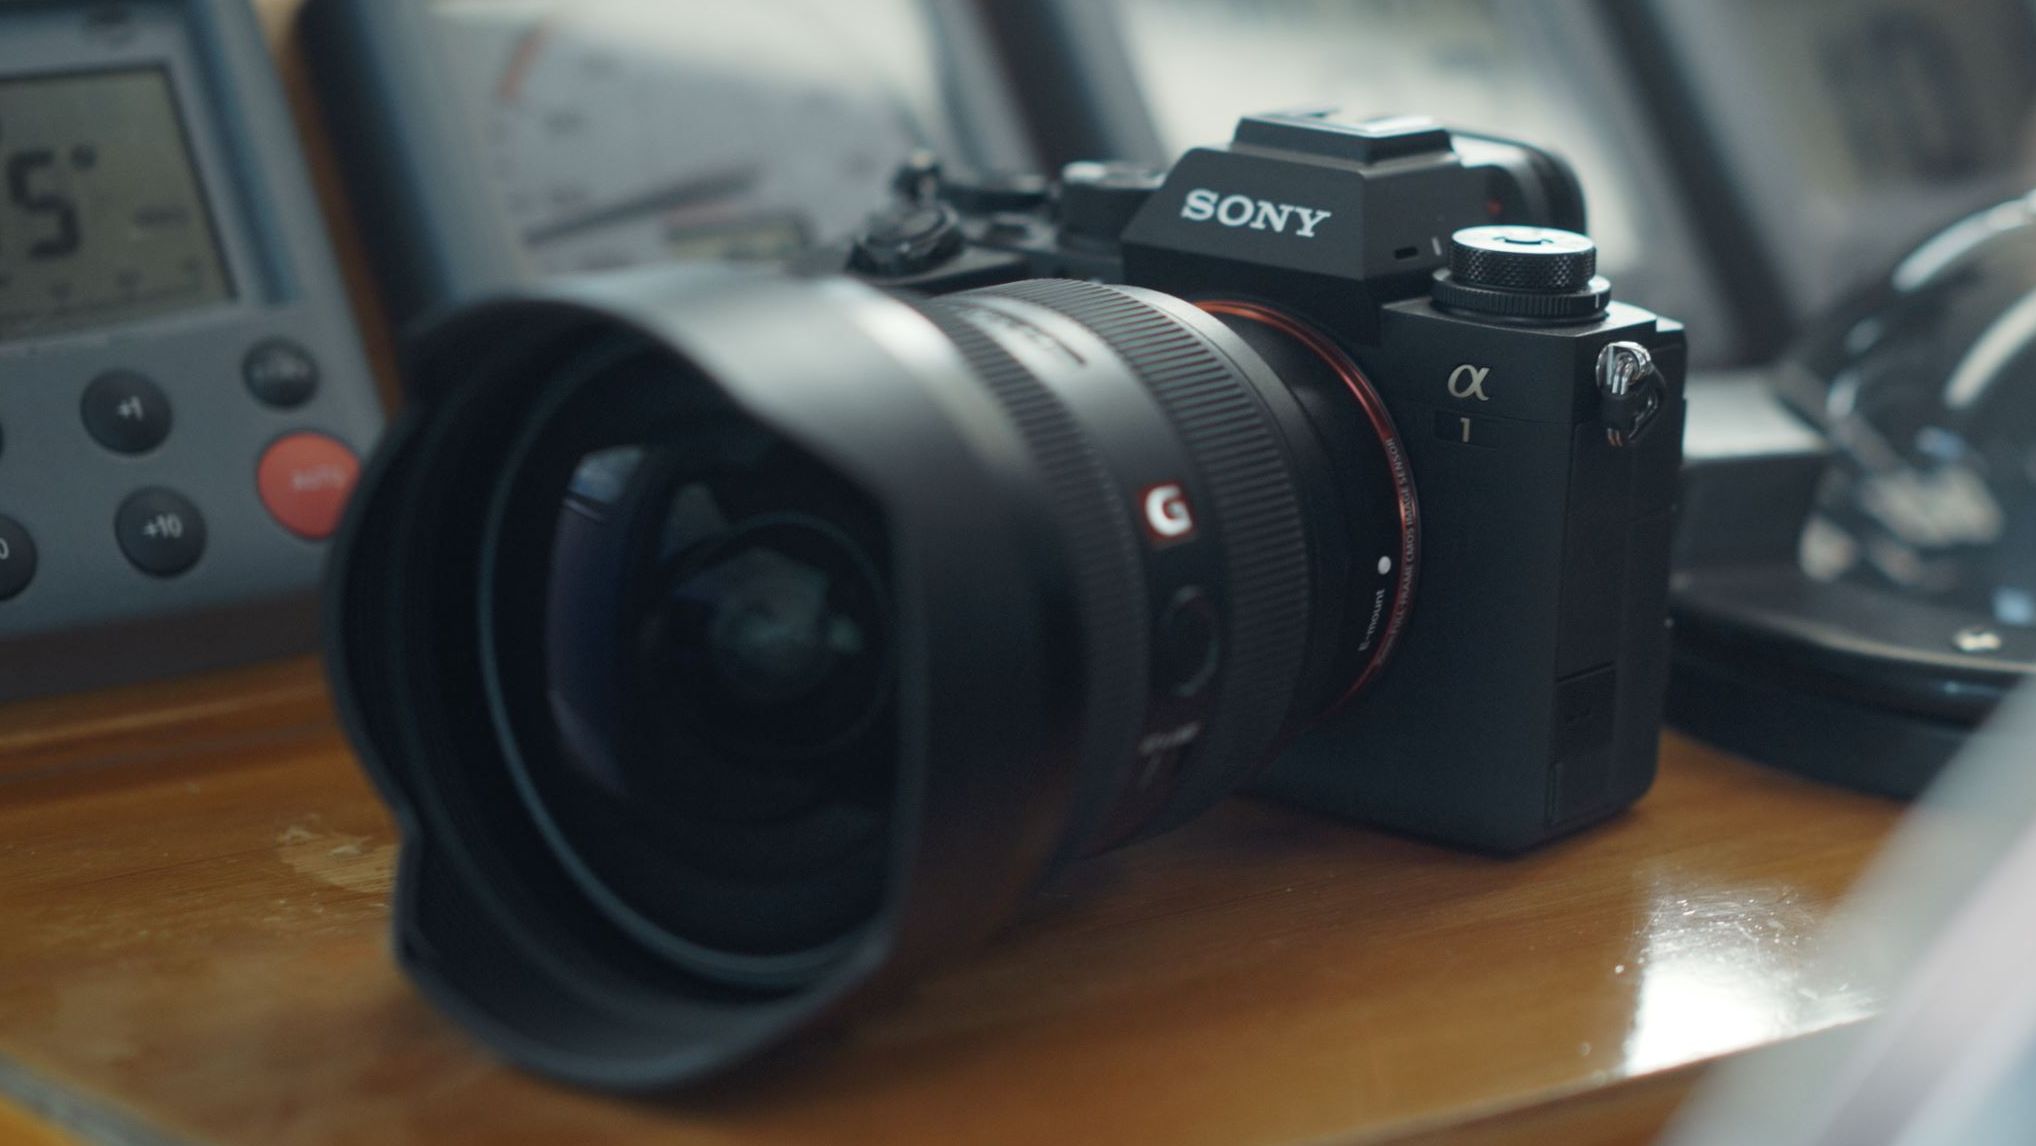 Sony a1 product image